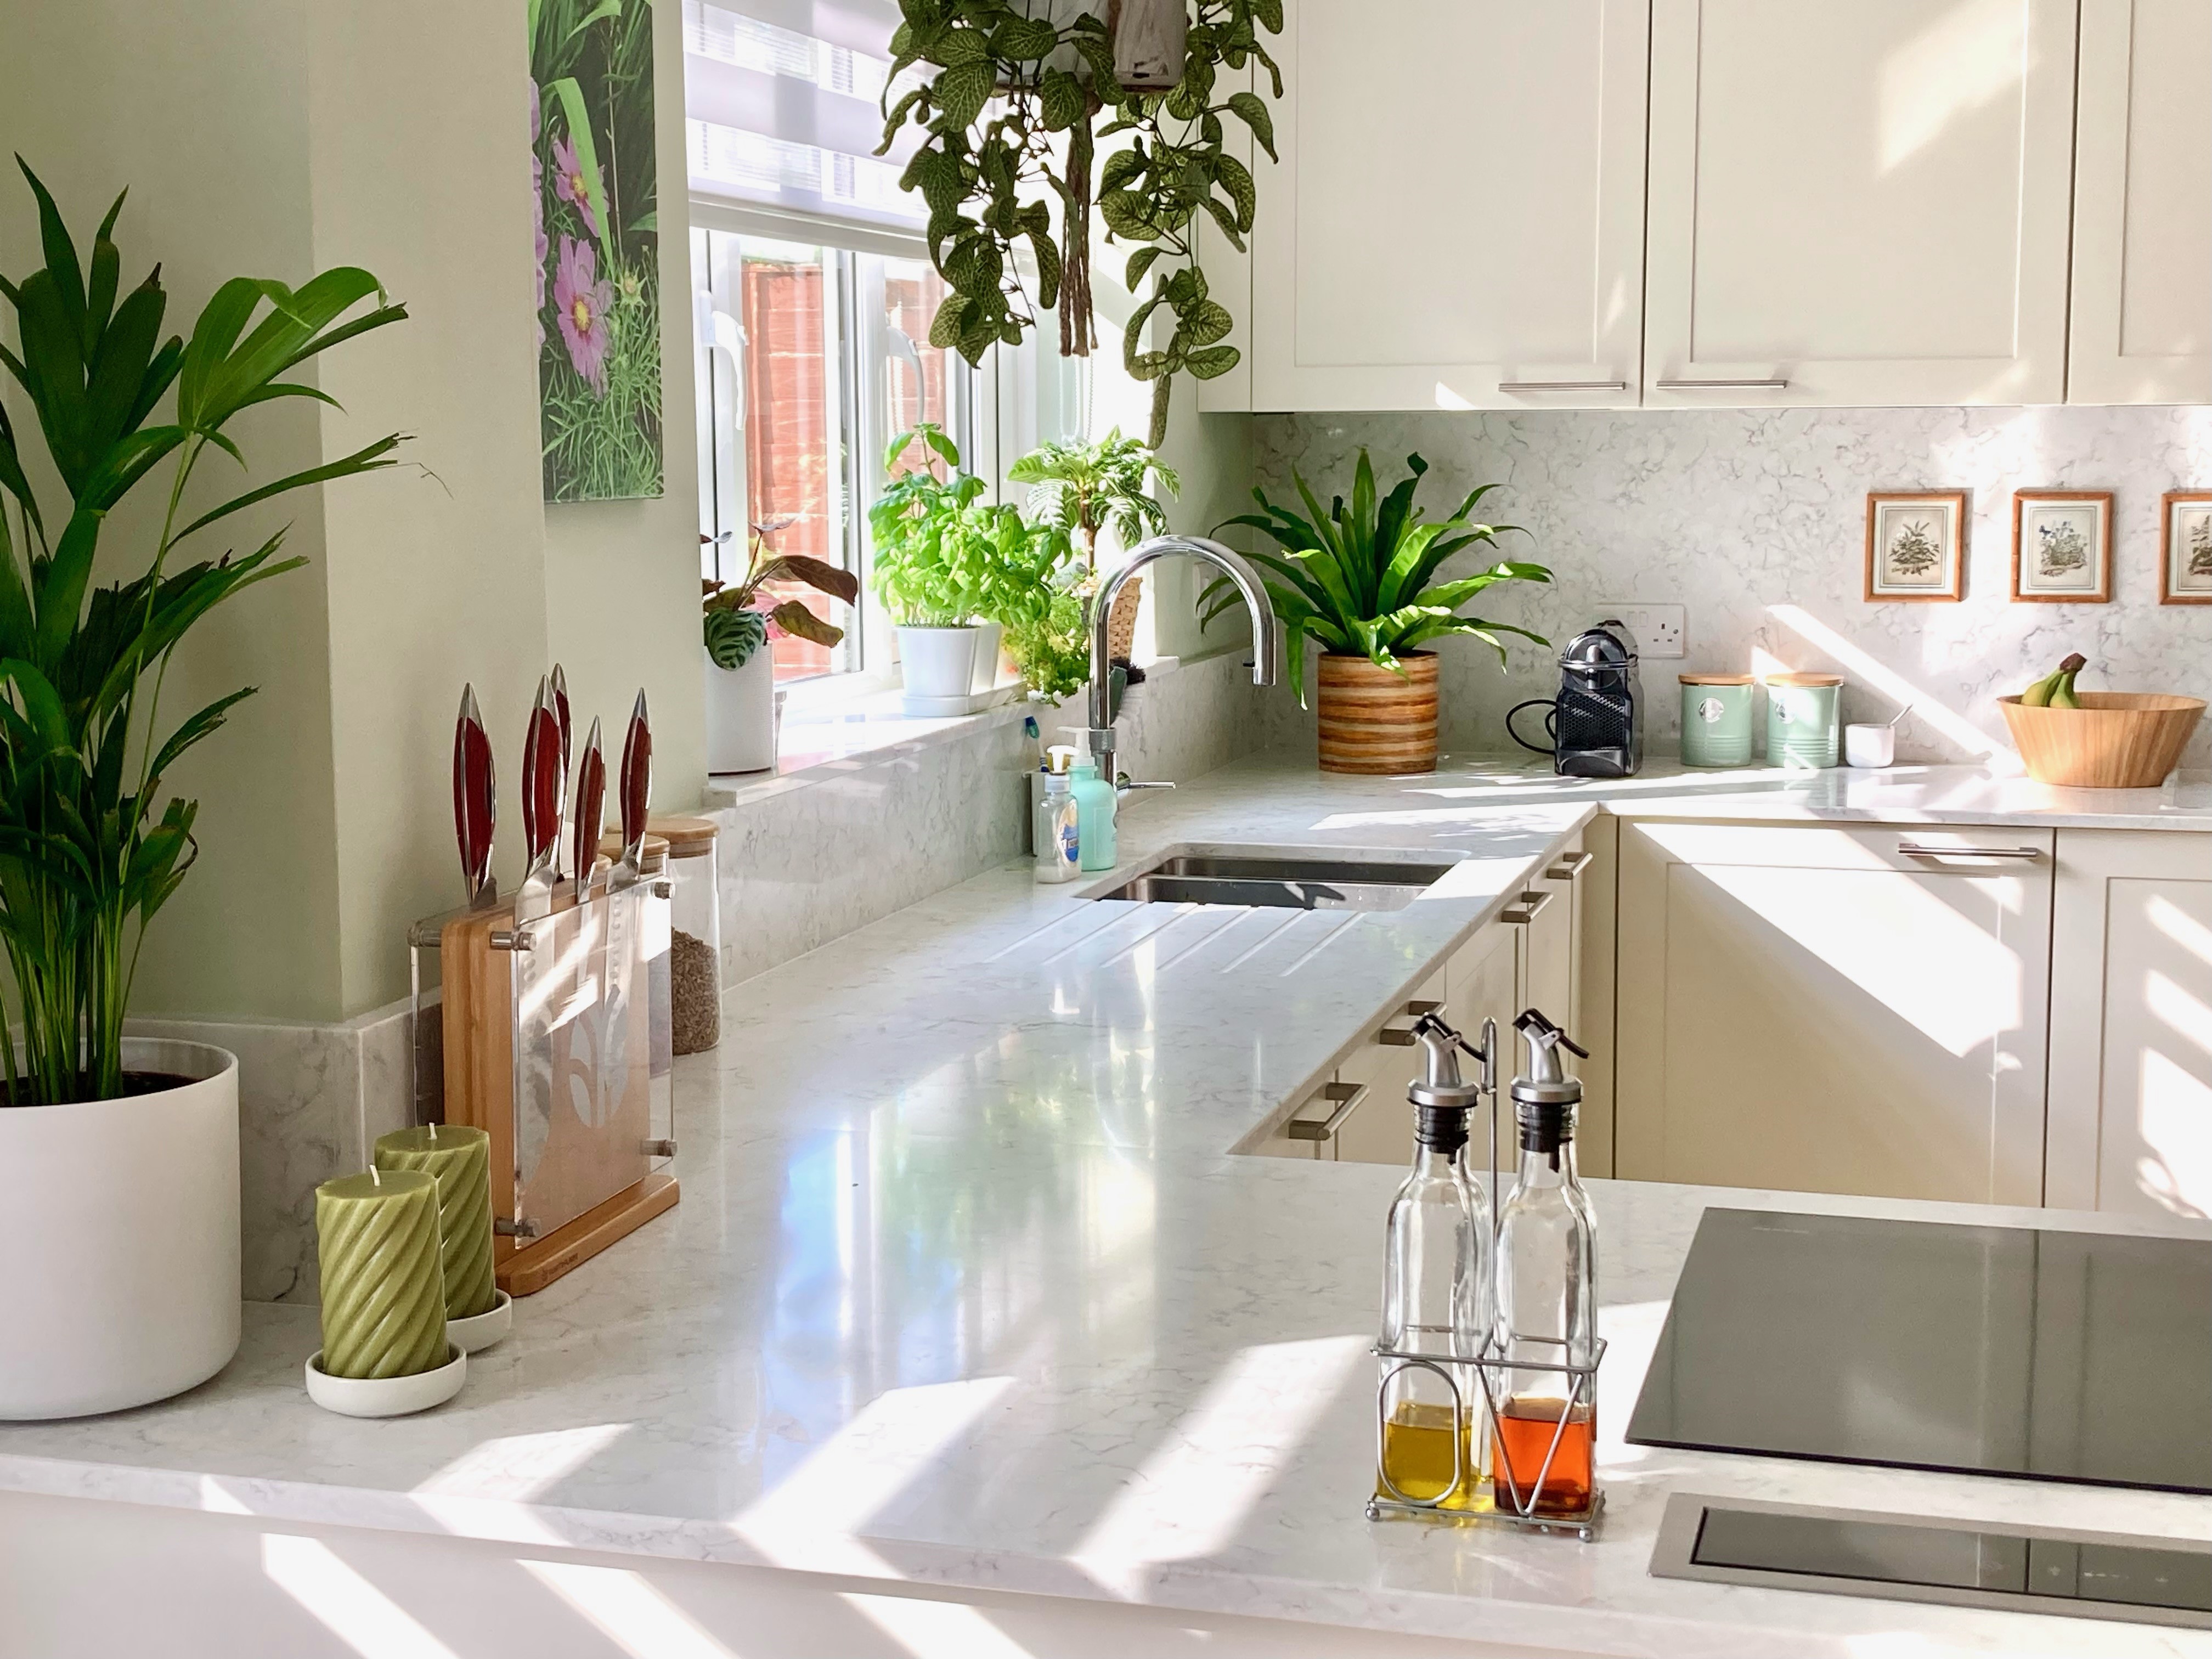 What Are the Best Houseplants for Your Kitchen?